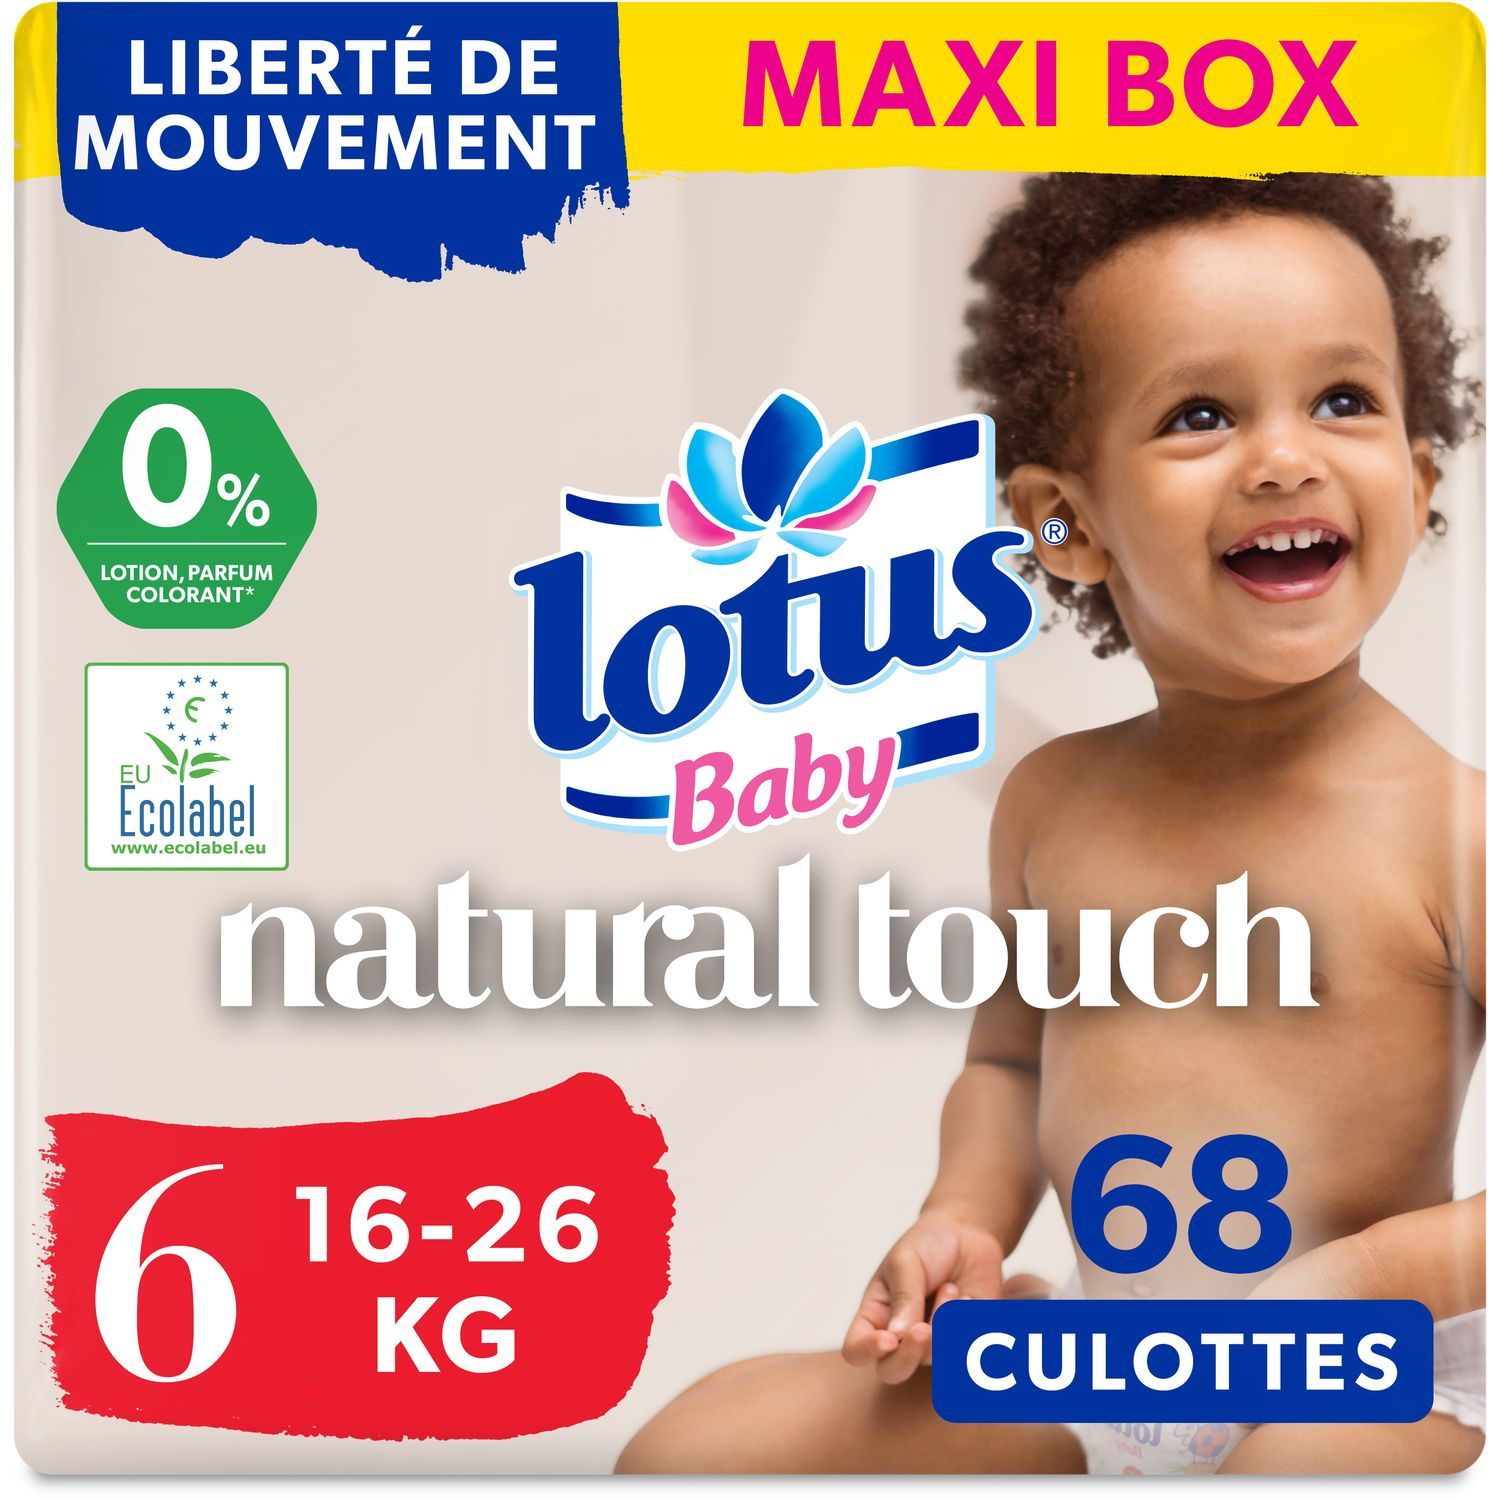 AUCHAN BABY Couches-culottes taille 6 +16kg 36 couches-culottes